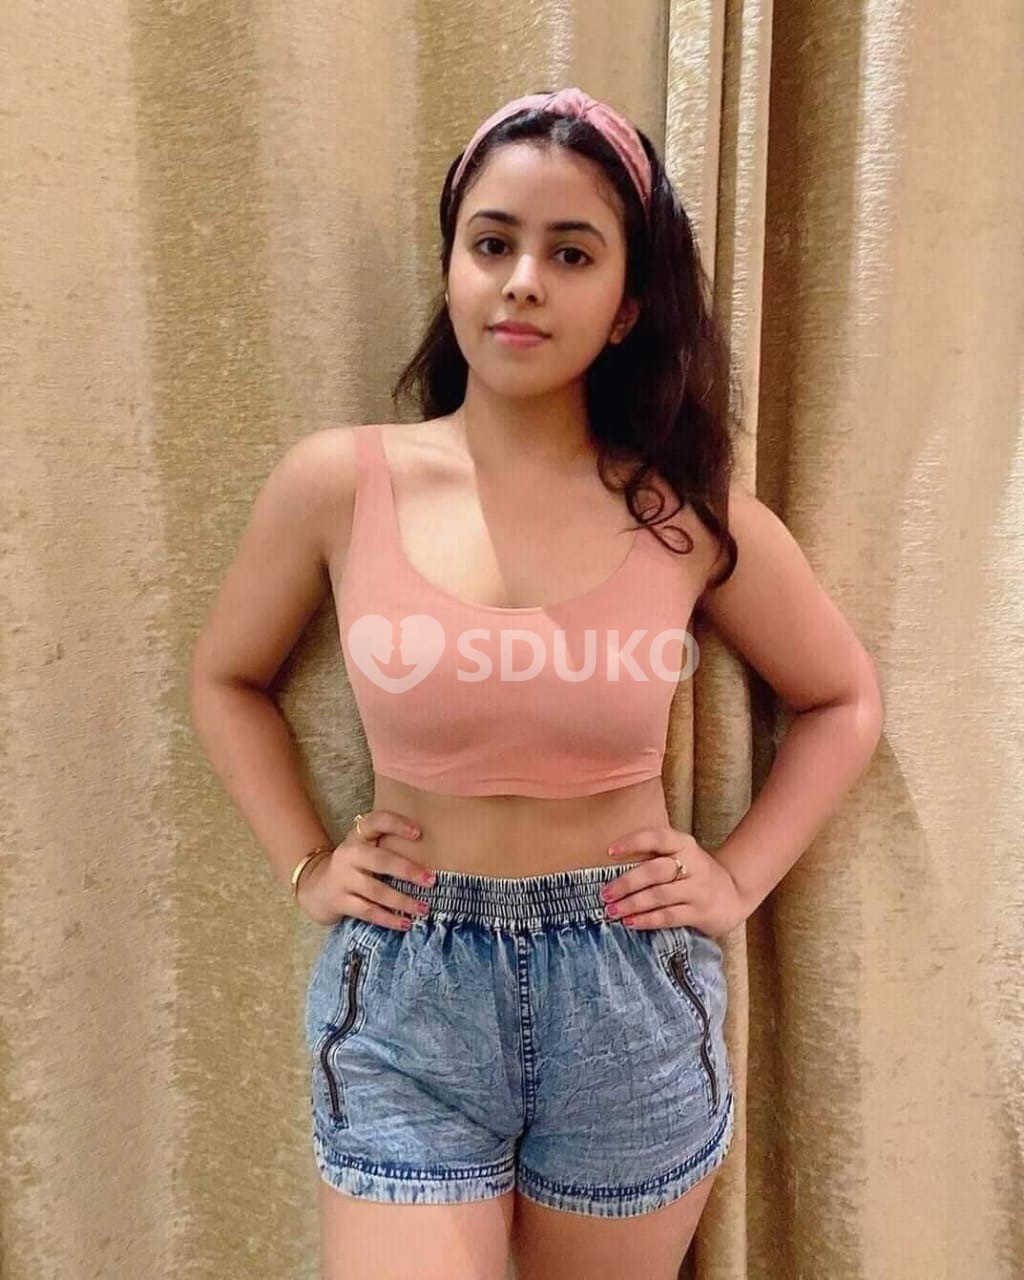 KOTA 💯% SAFE AND SECURE TODAY LOW PRICE UNLIMITED ENJOY HOT COLLEGE GIRL HOUSEWIFE AUNTIES AVAILABLE. ....